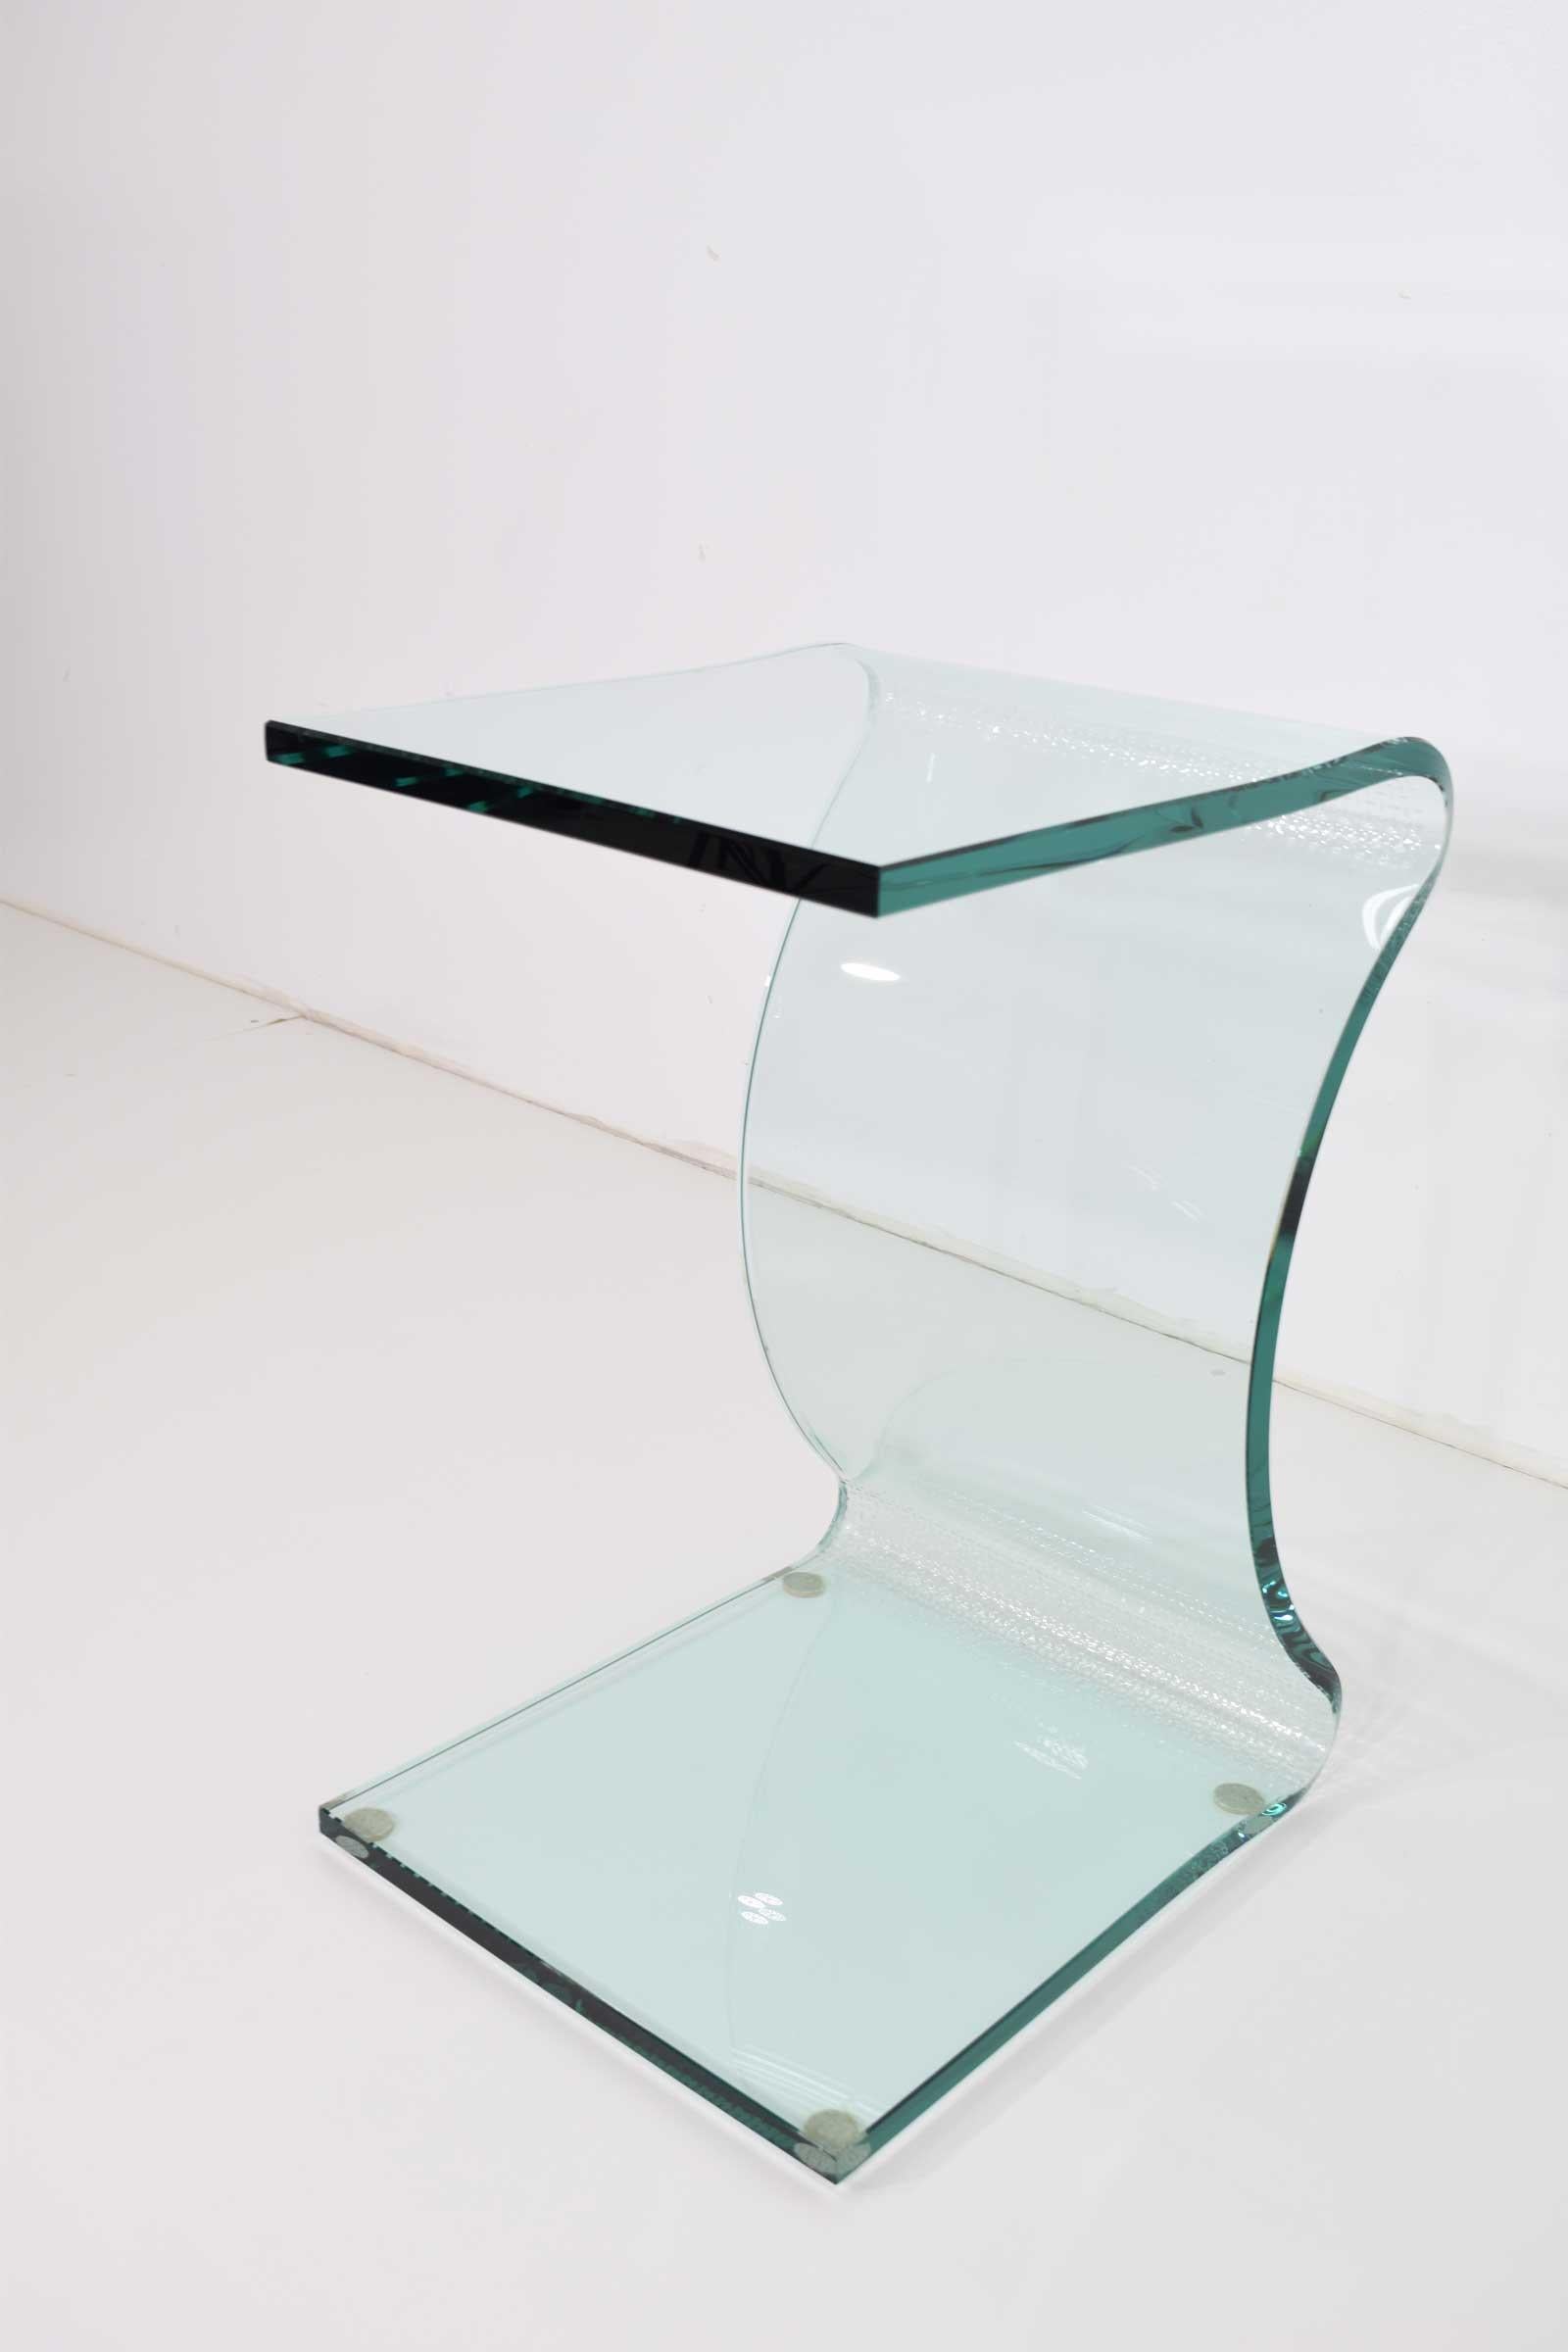 American L. Fife Signed Glass Side Table